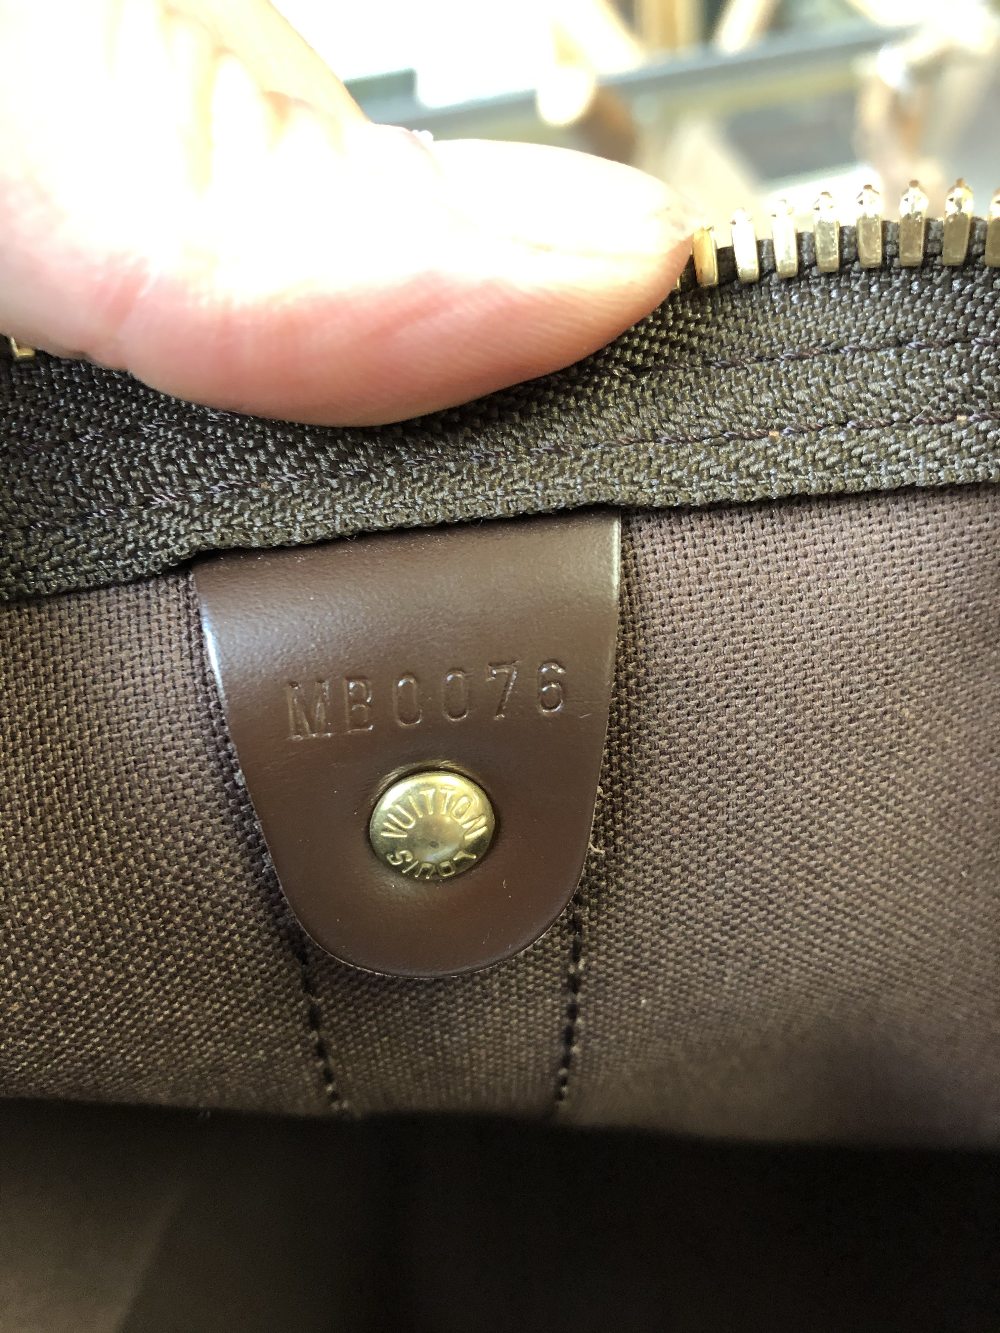 LOUIS VUITTON; a Keepall Bandouliere 55 Monogram macassar Boston bag, with brown leather straps - Image 8 of 9